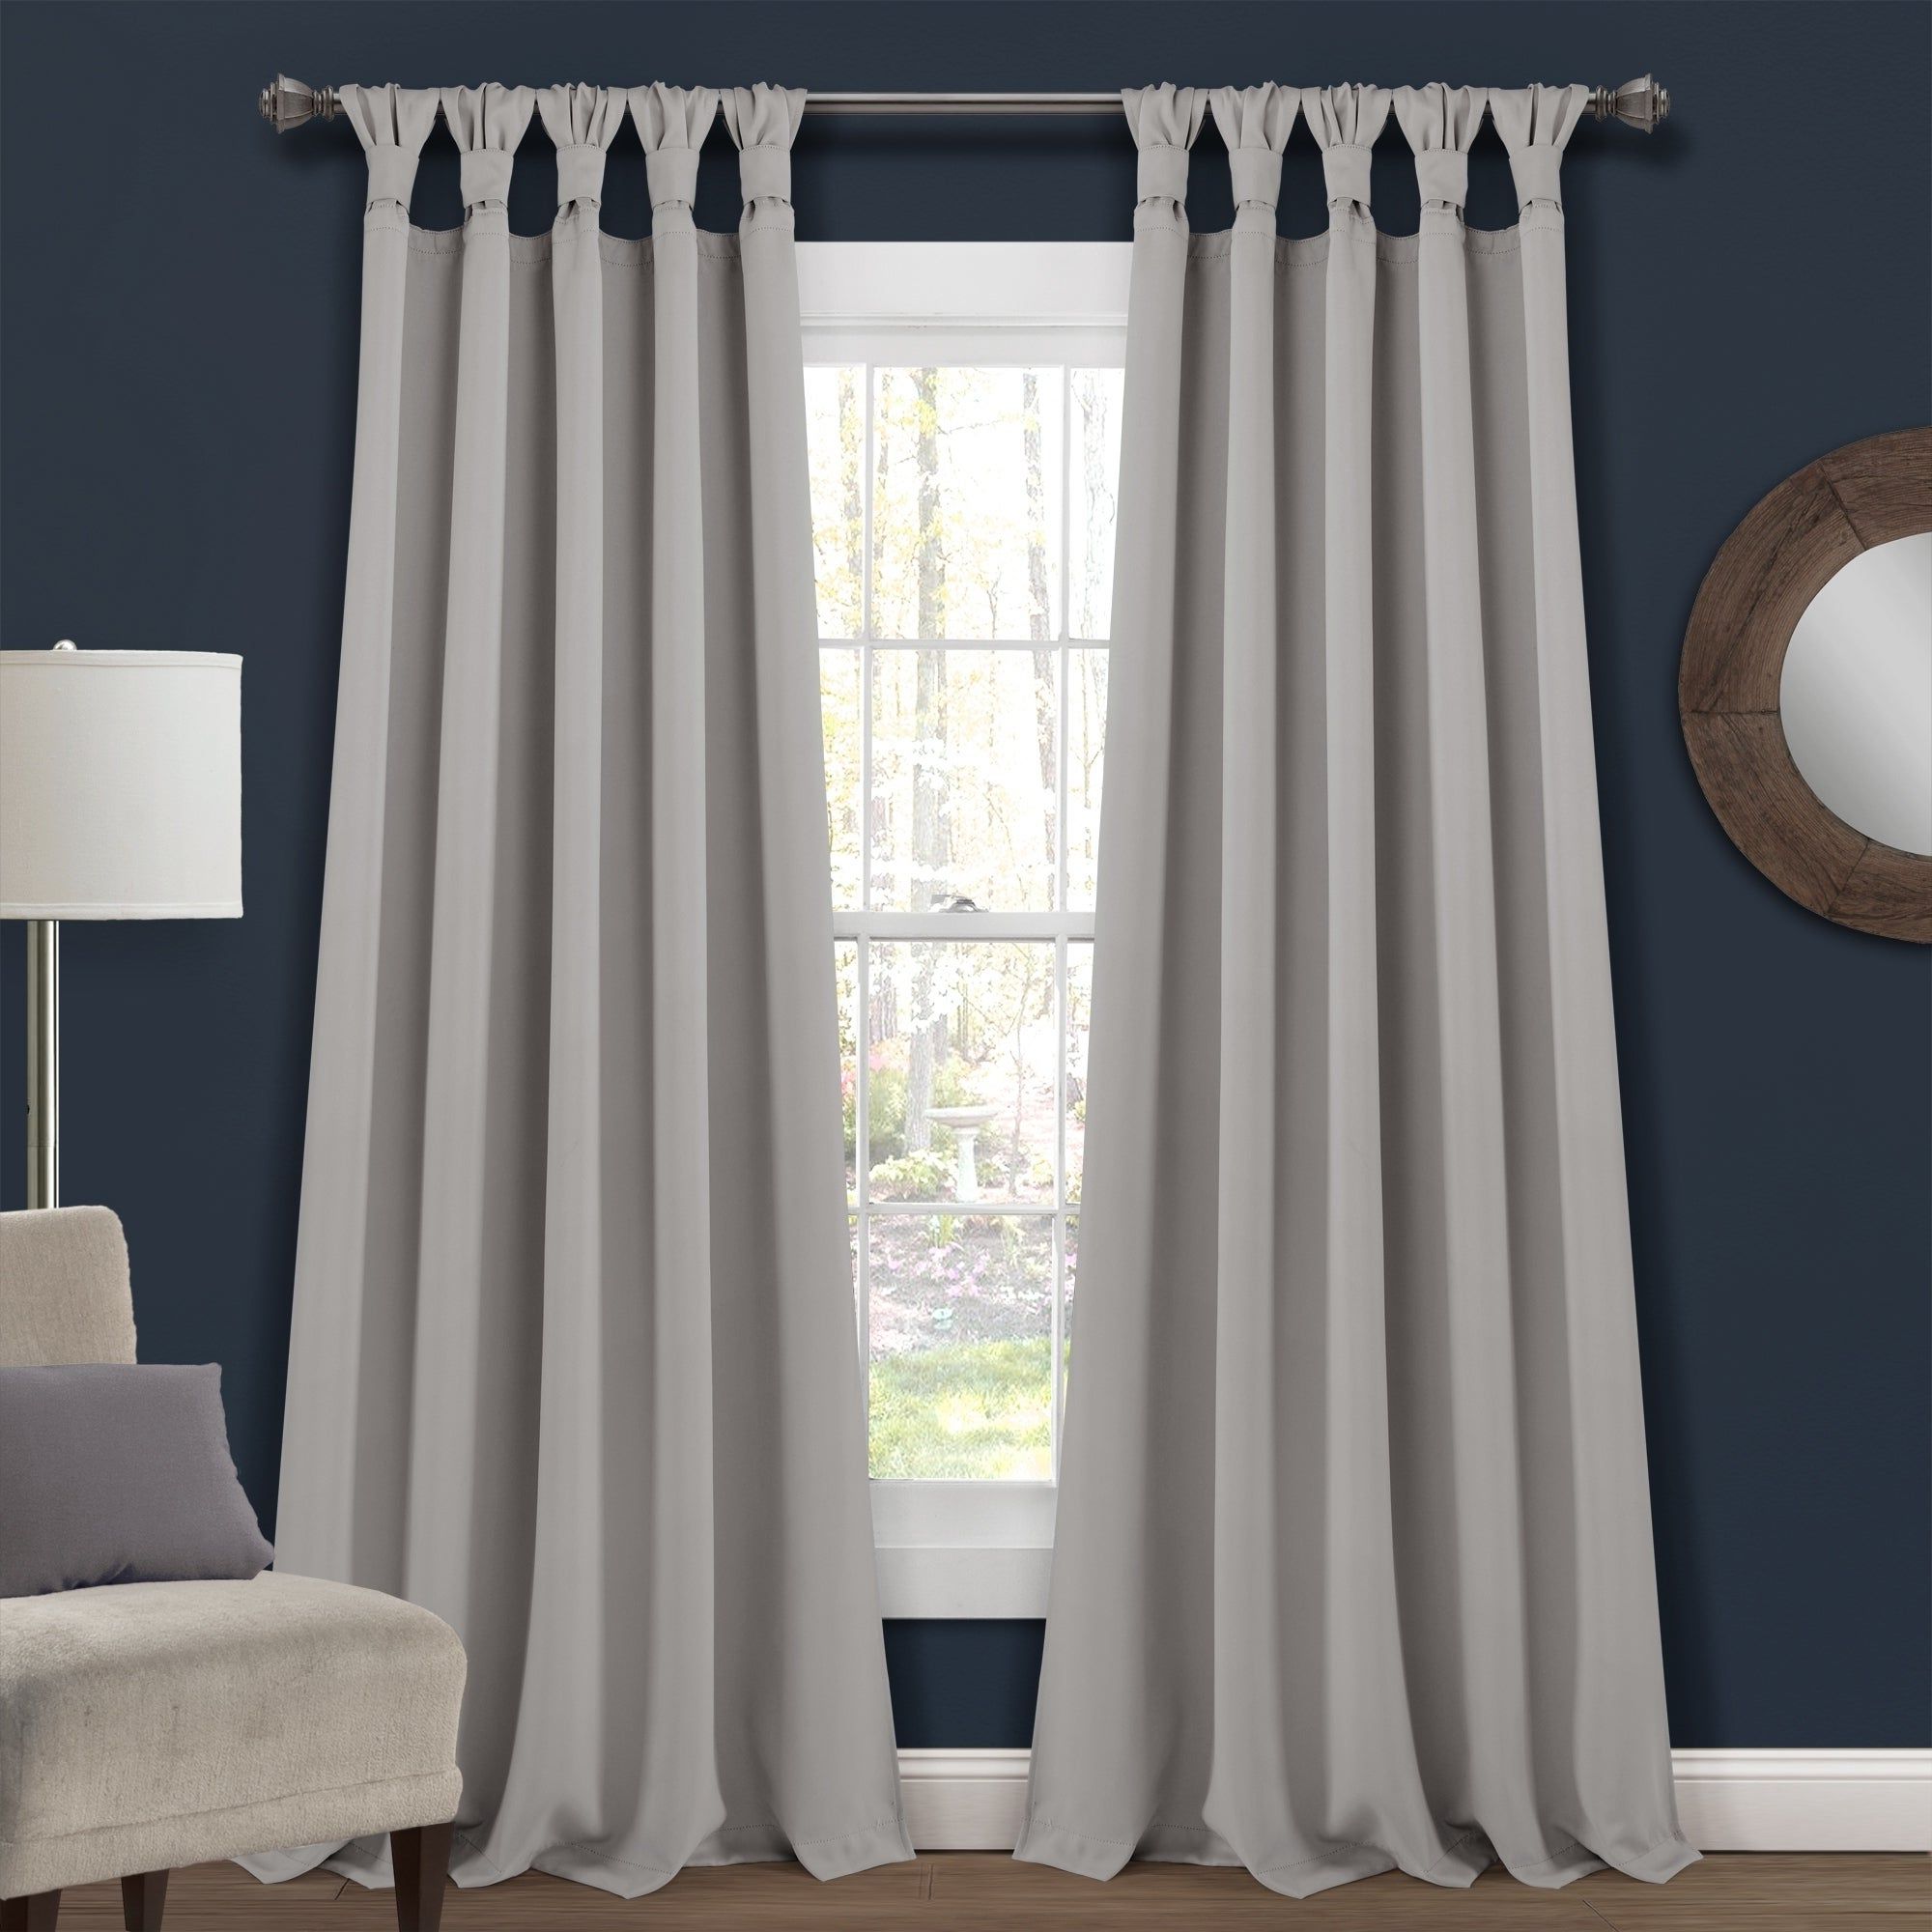 Popular Lush Decor Insulated Knotted Tab Top Blackout Window Curtain Panel Pair With Knotted Tab Top Window Curtain Panel Pairs (View 5 of 20)